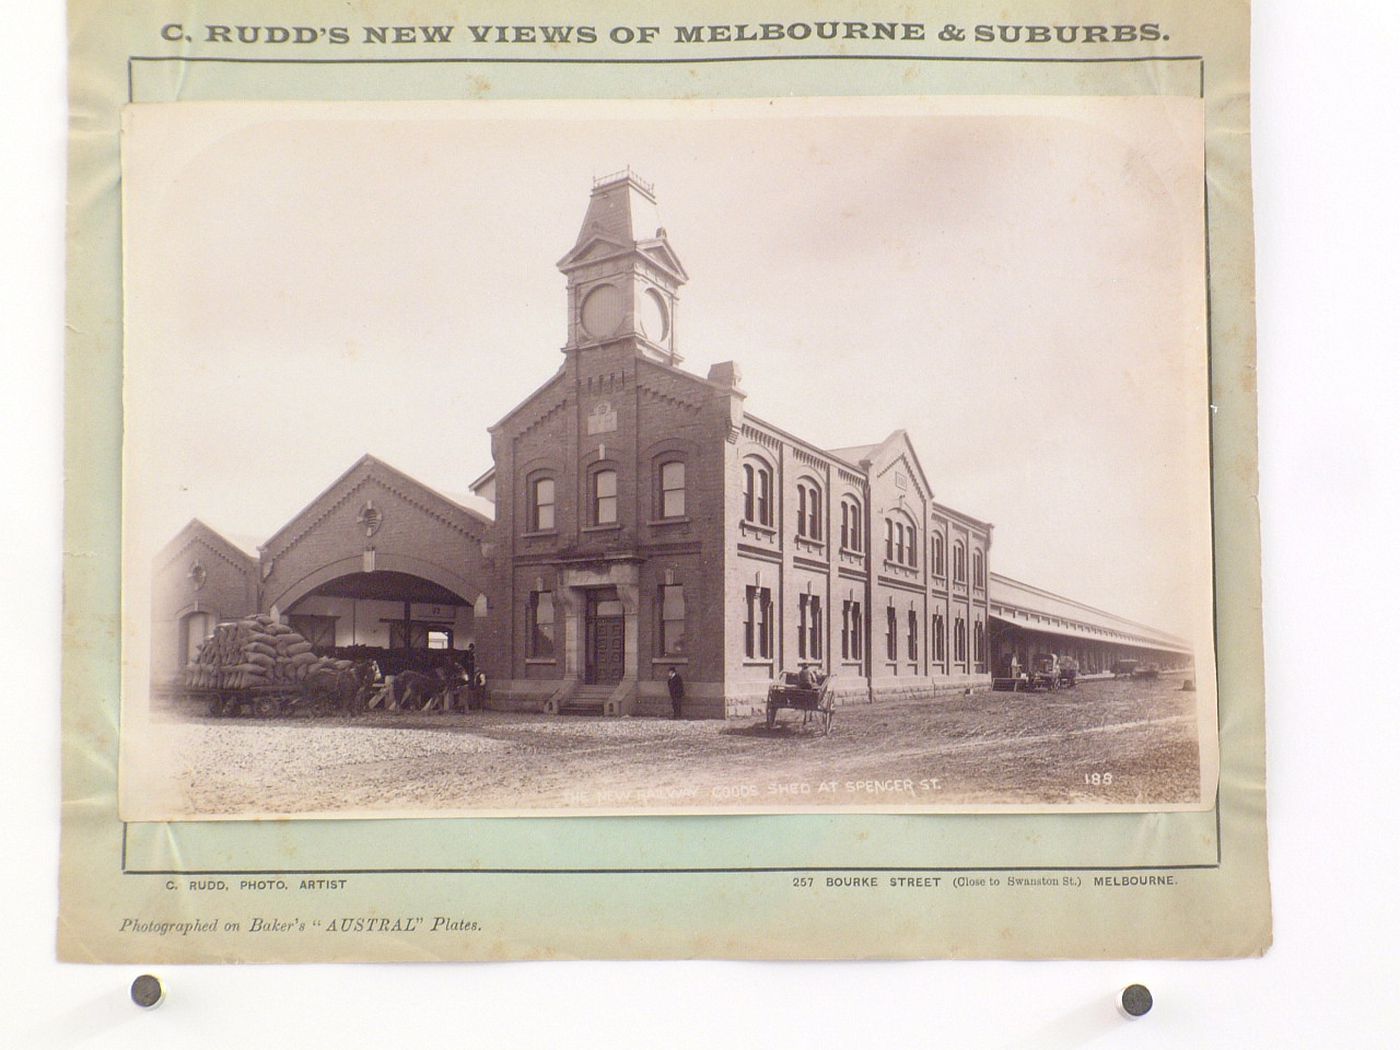 View of Railway Goods Shed showing the railway platform, the administration building and a platform for delivering goods [?], Spencer Street, Melbourne, Australia